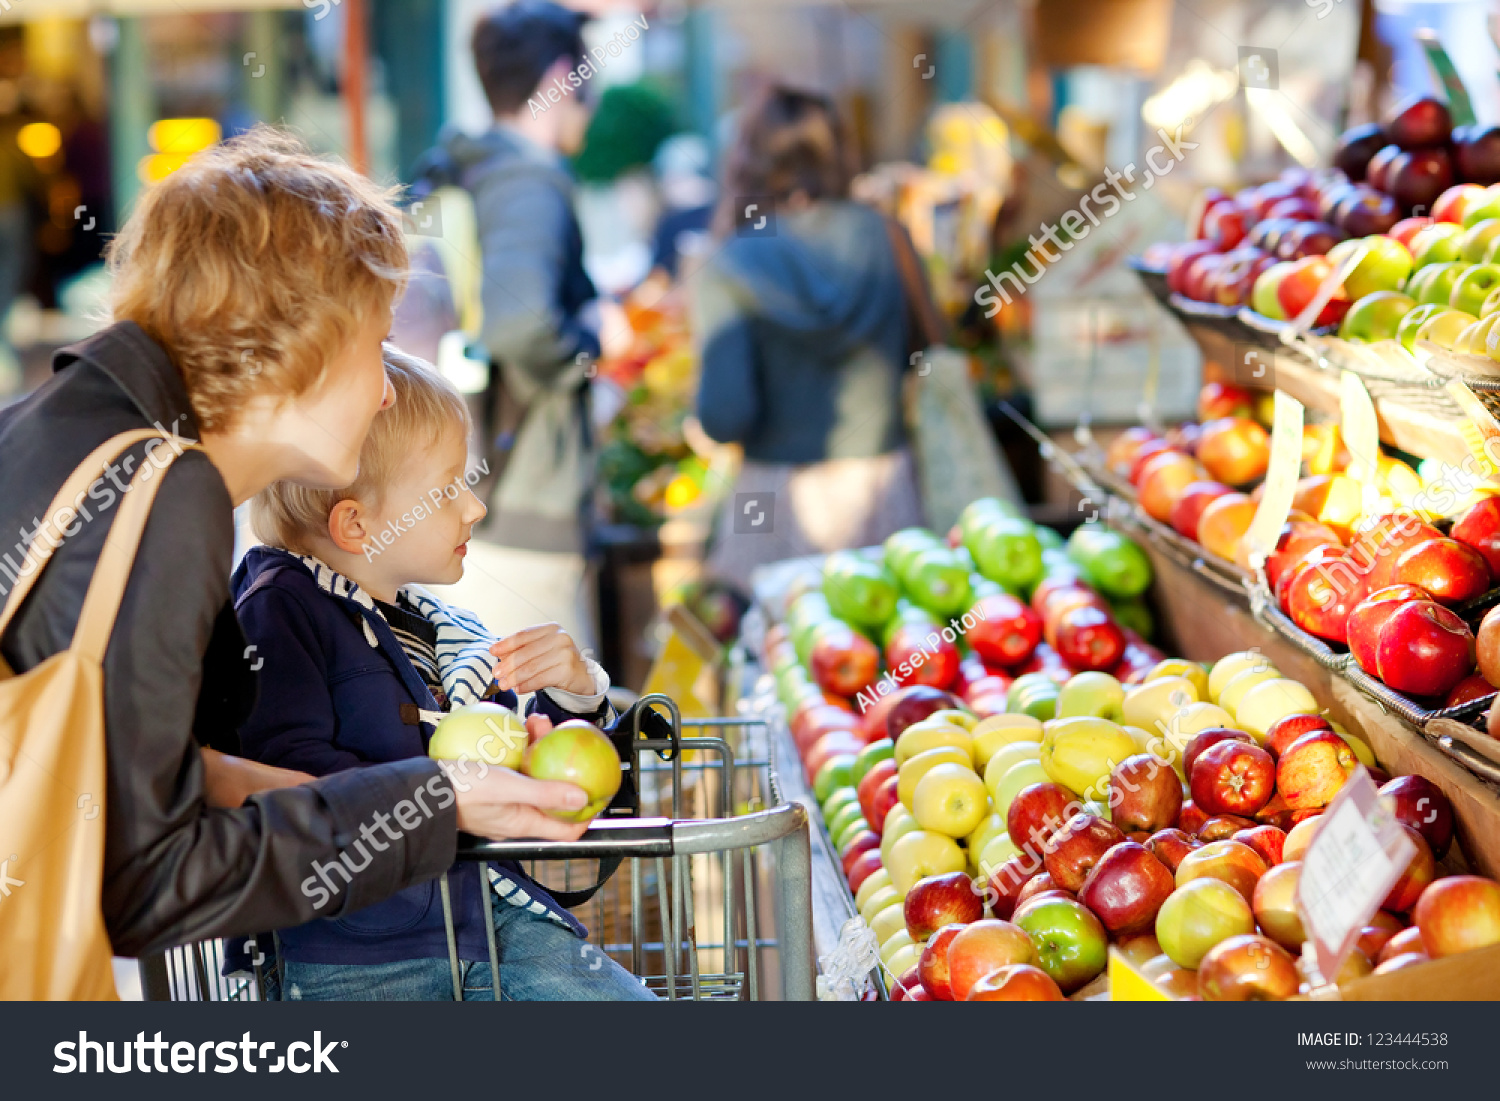 mother and her son buying fruits at a farmers market #123444538